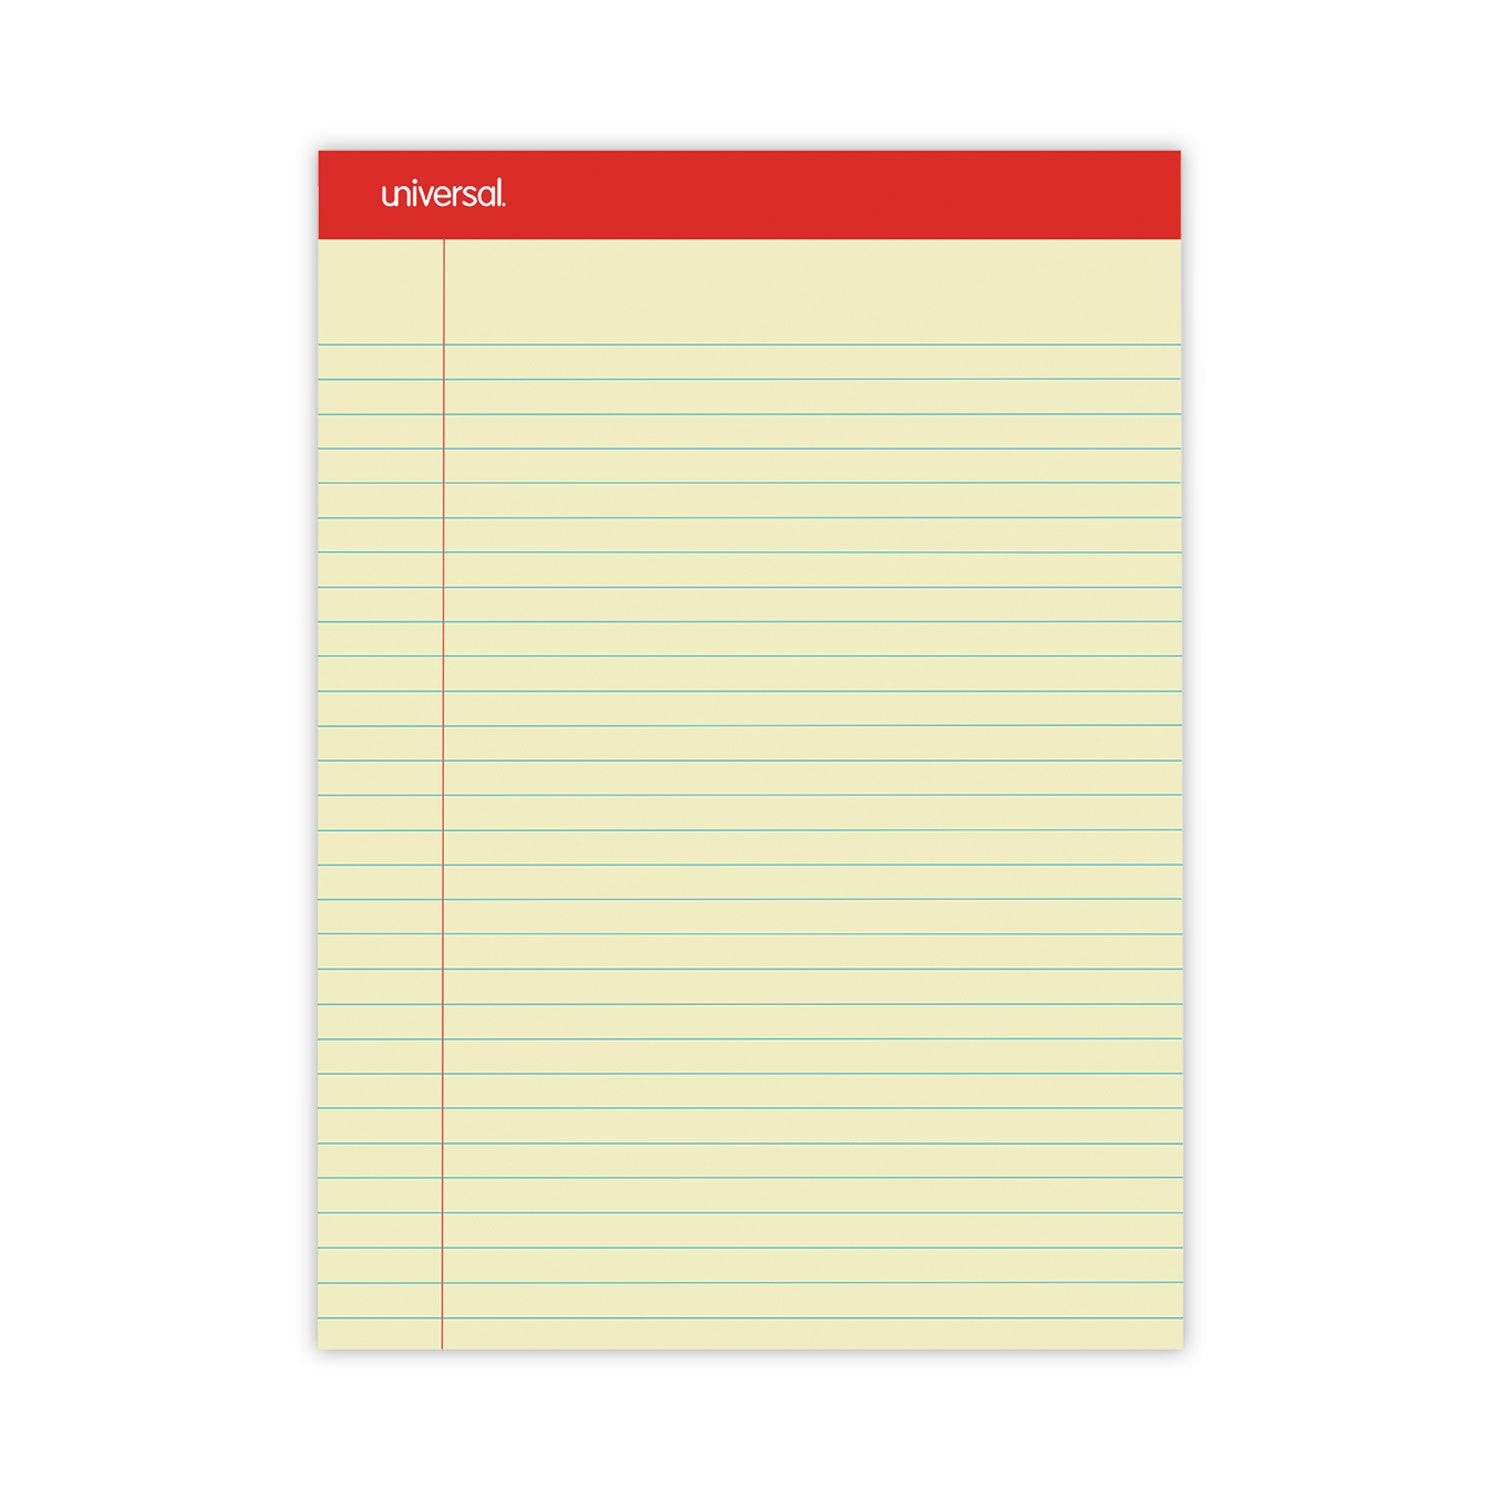 Perforated Ruled Writing Pads, Wide/Legal Rule, Red Headband, 50 Canary-Yellow 8.5 x 11.75 Sheets, Dozen - 